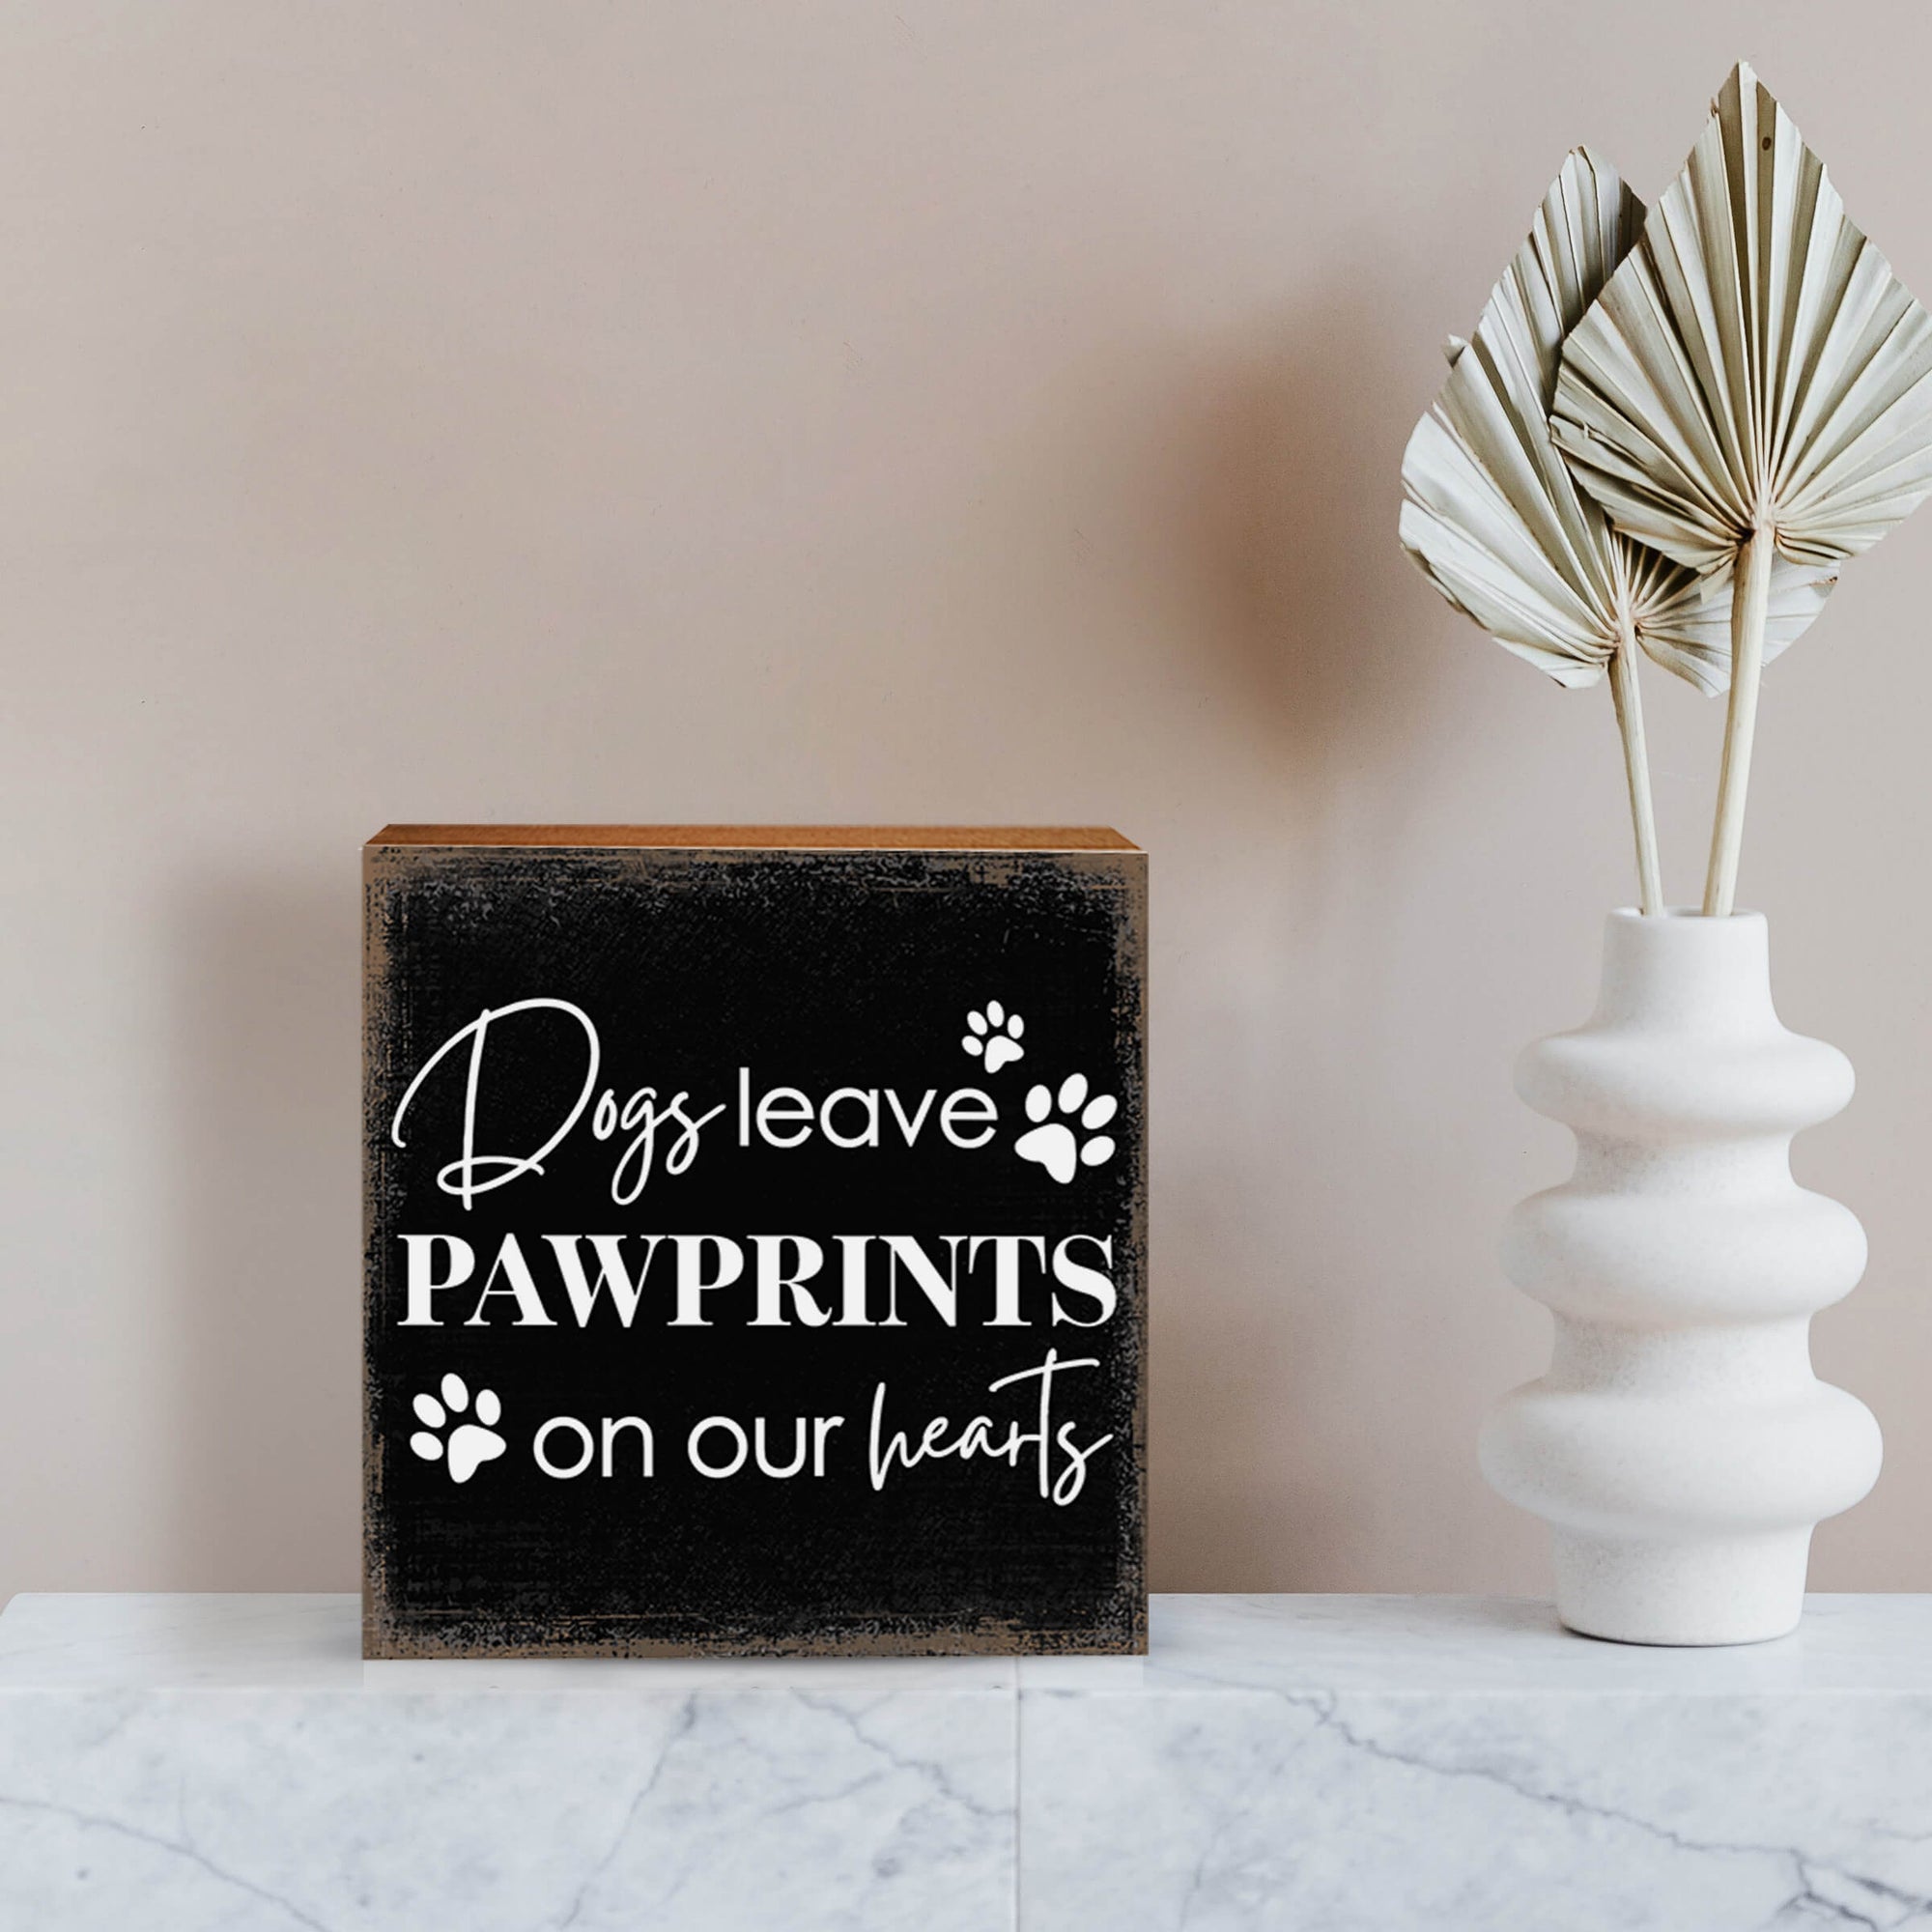 Wooden Shelf Decor and Tabletop Signs with Pet Verses - Dogs Leave Pawprints